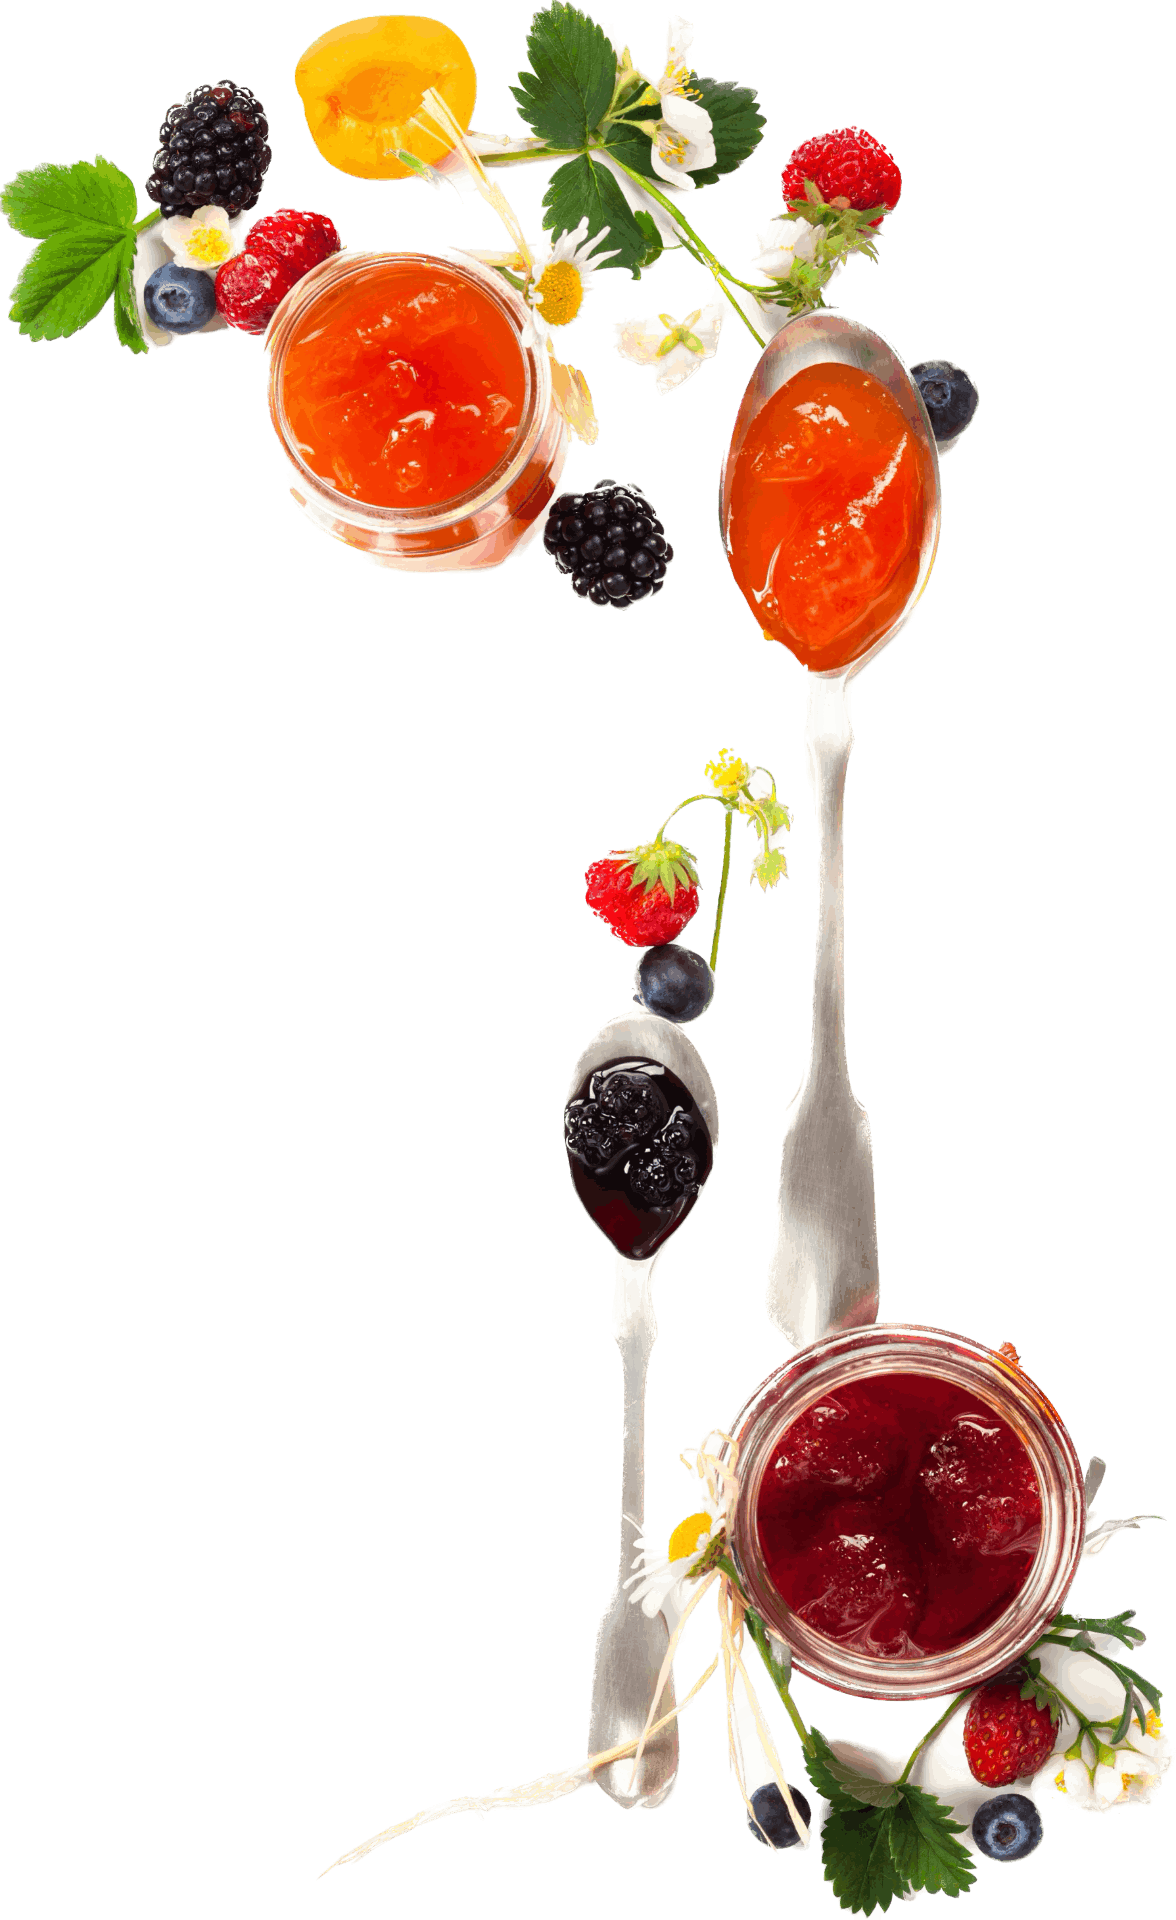 Fruits and Jam